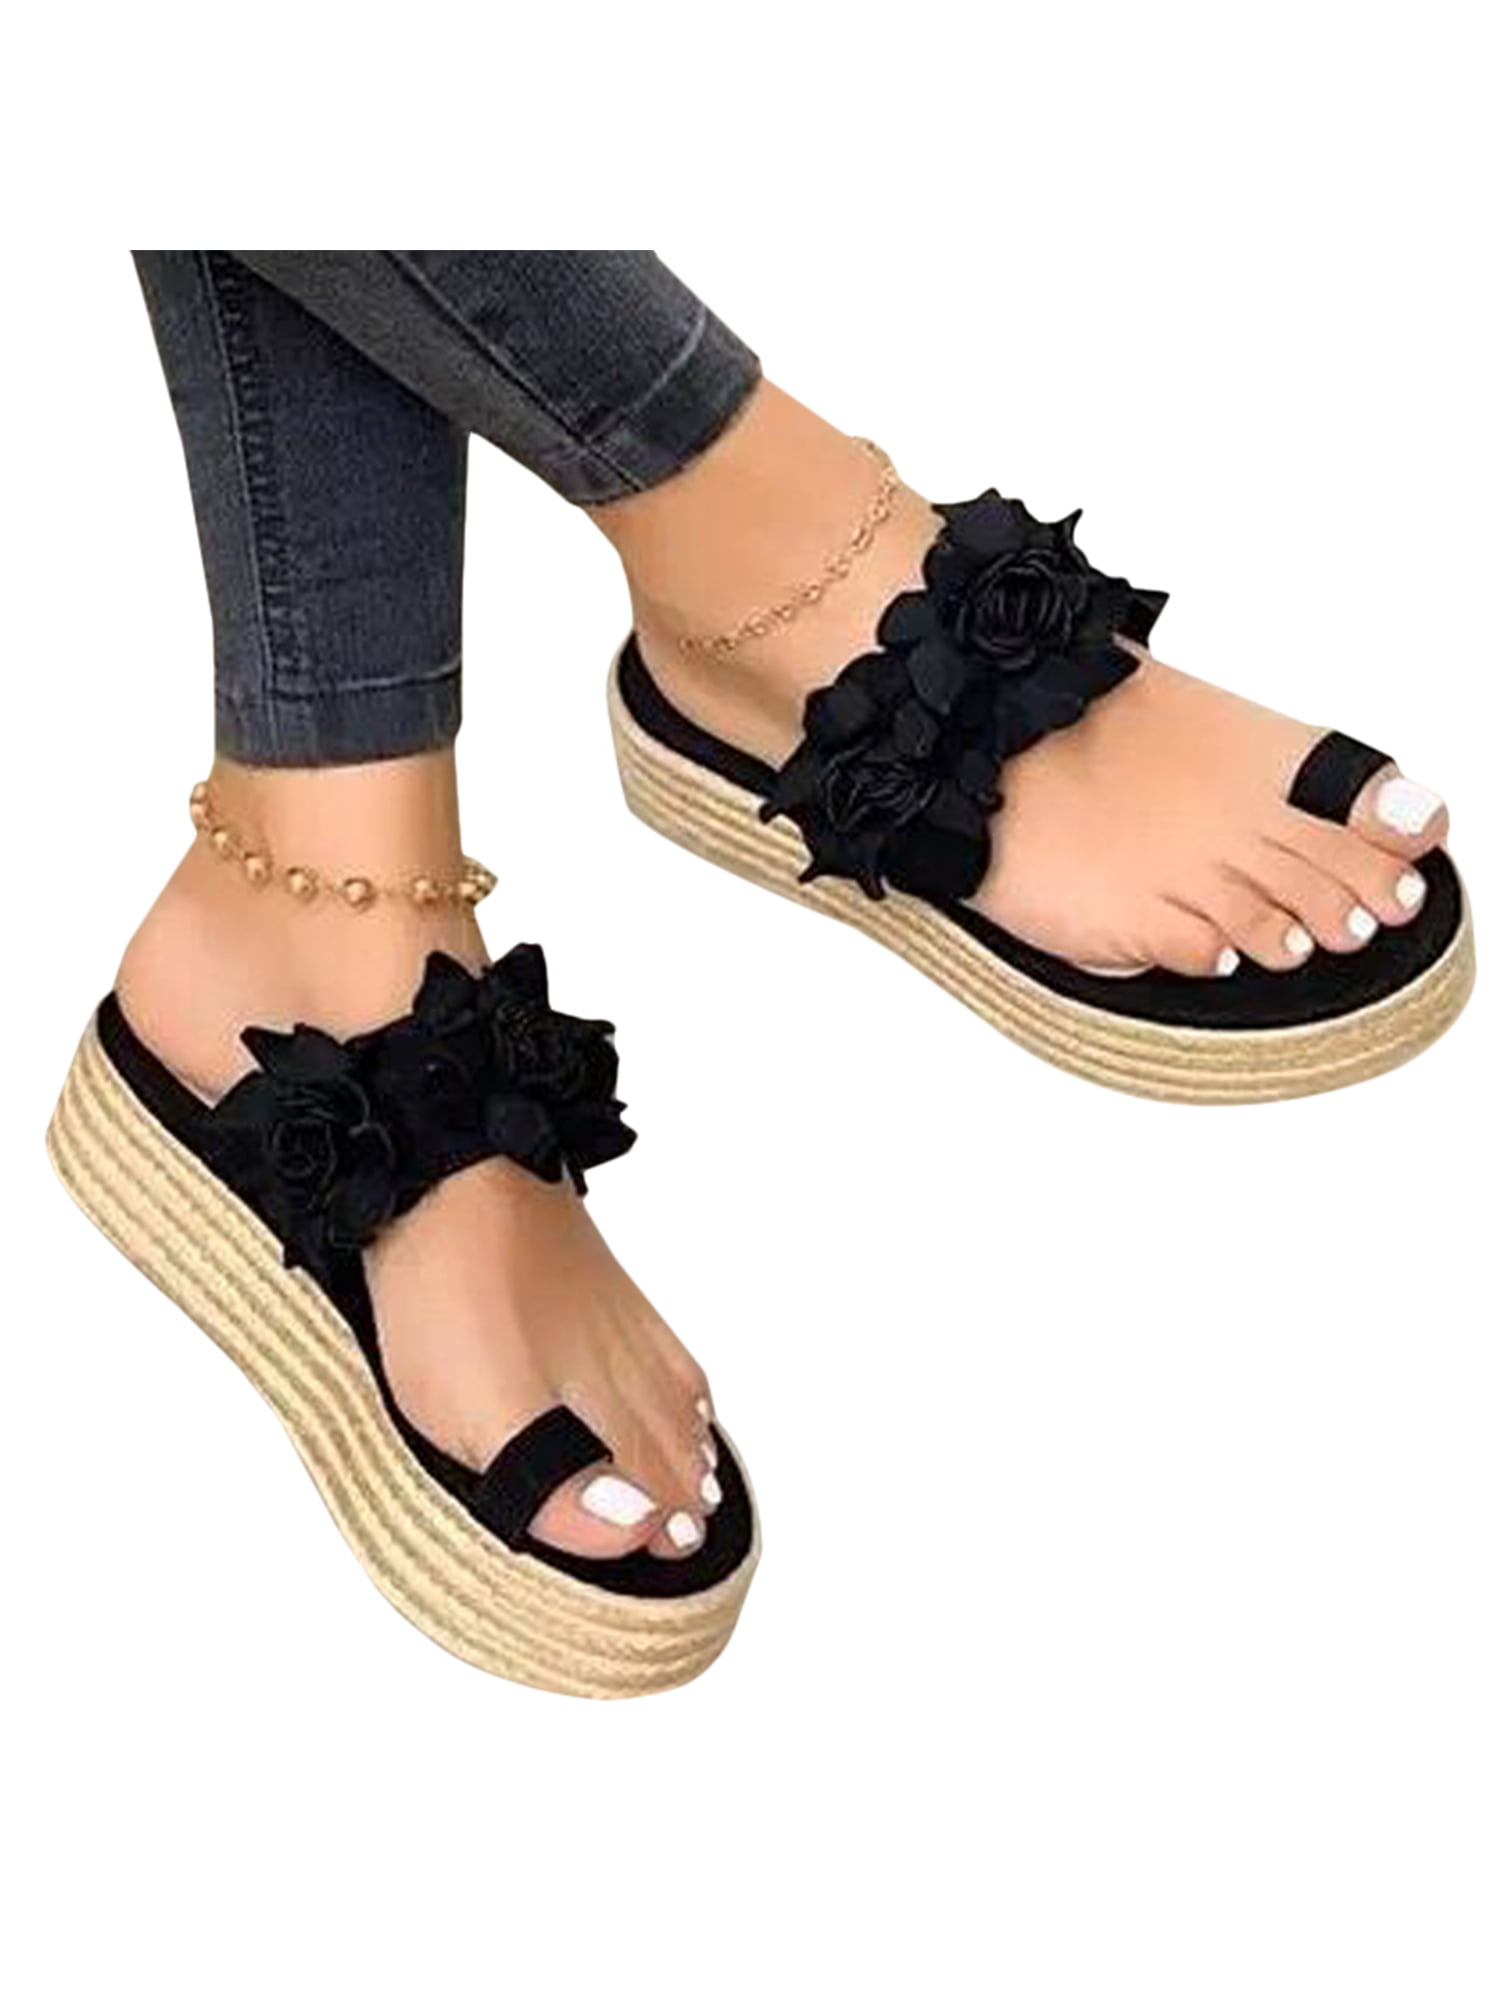 Wedge Sandals for Women Espadrille Ankle Buckle Strap Platform Open Toe Casual Slingback Sandals Daily Beach 